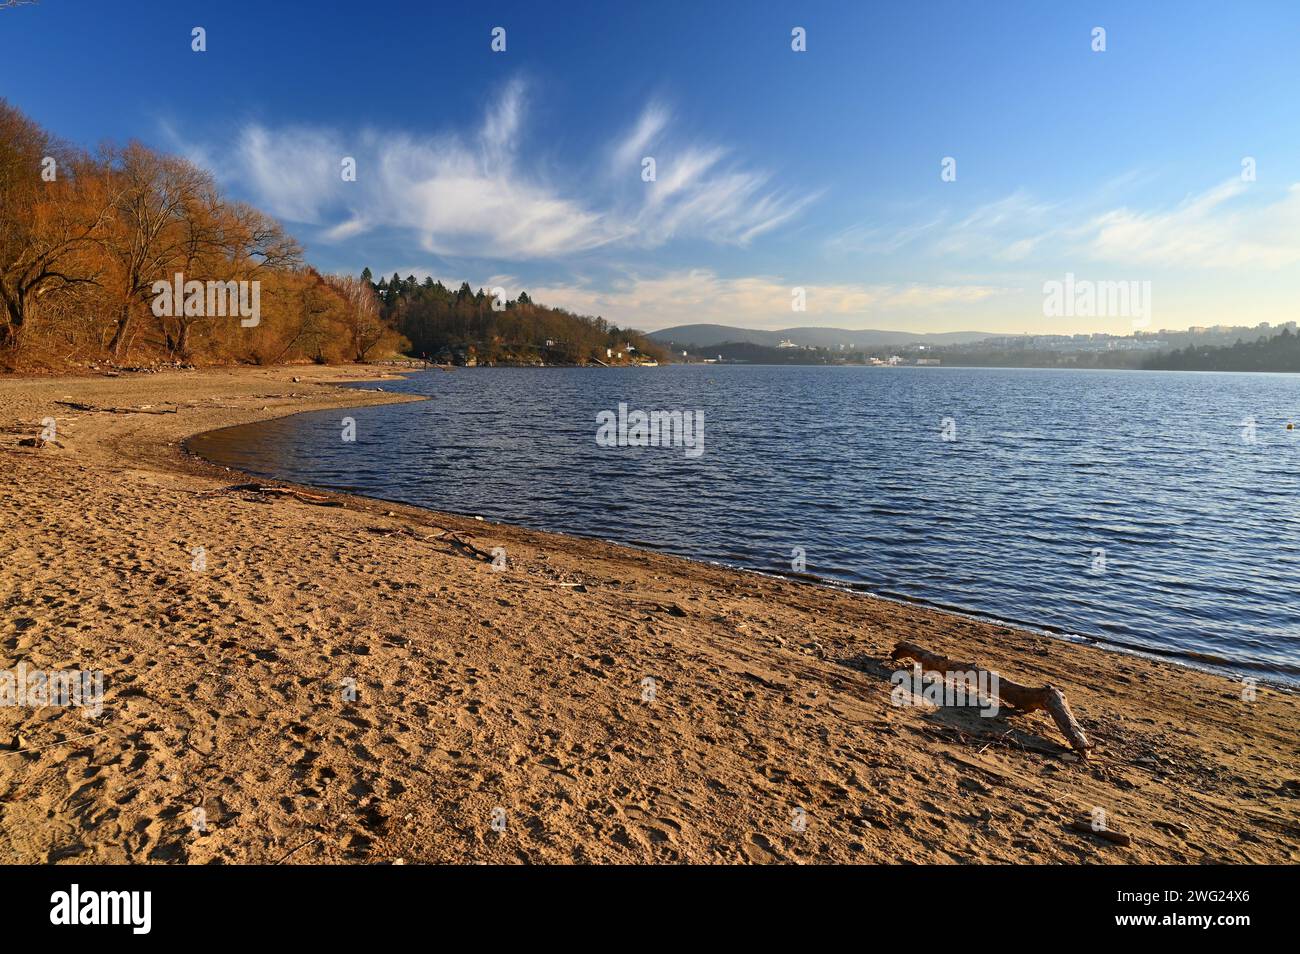 Brno Reservoir - City of Brno - Czech Republic - Europe. Beautiful landscape with water and beach. Nice sunny weather with blue sky in winter time. Stock Photo